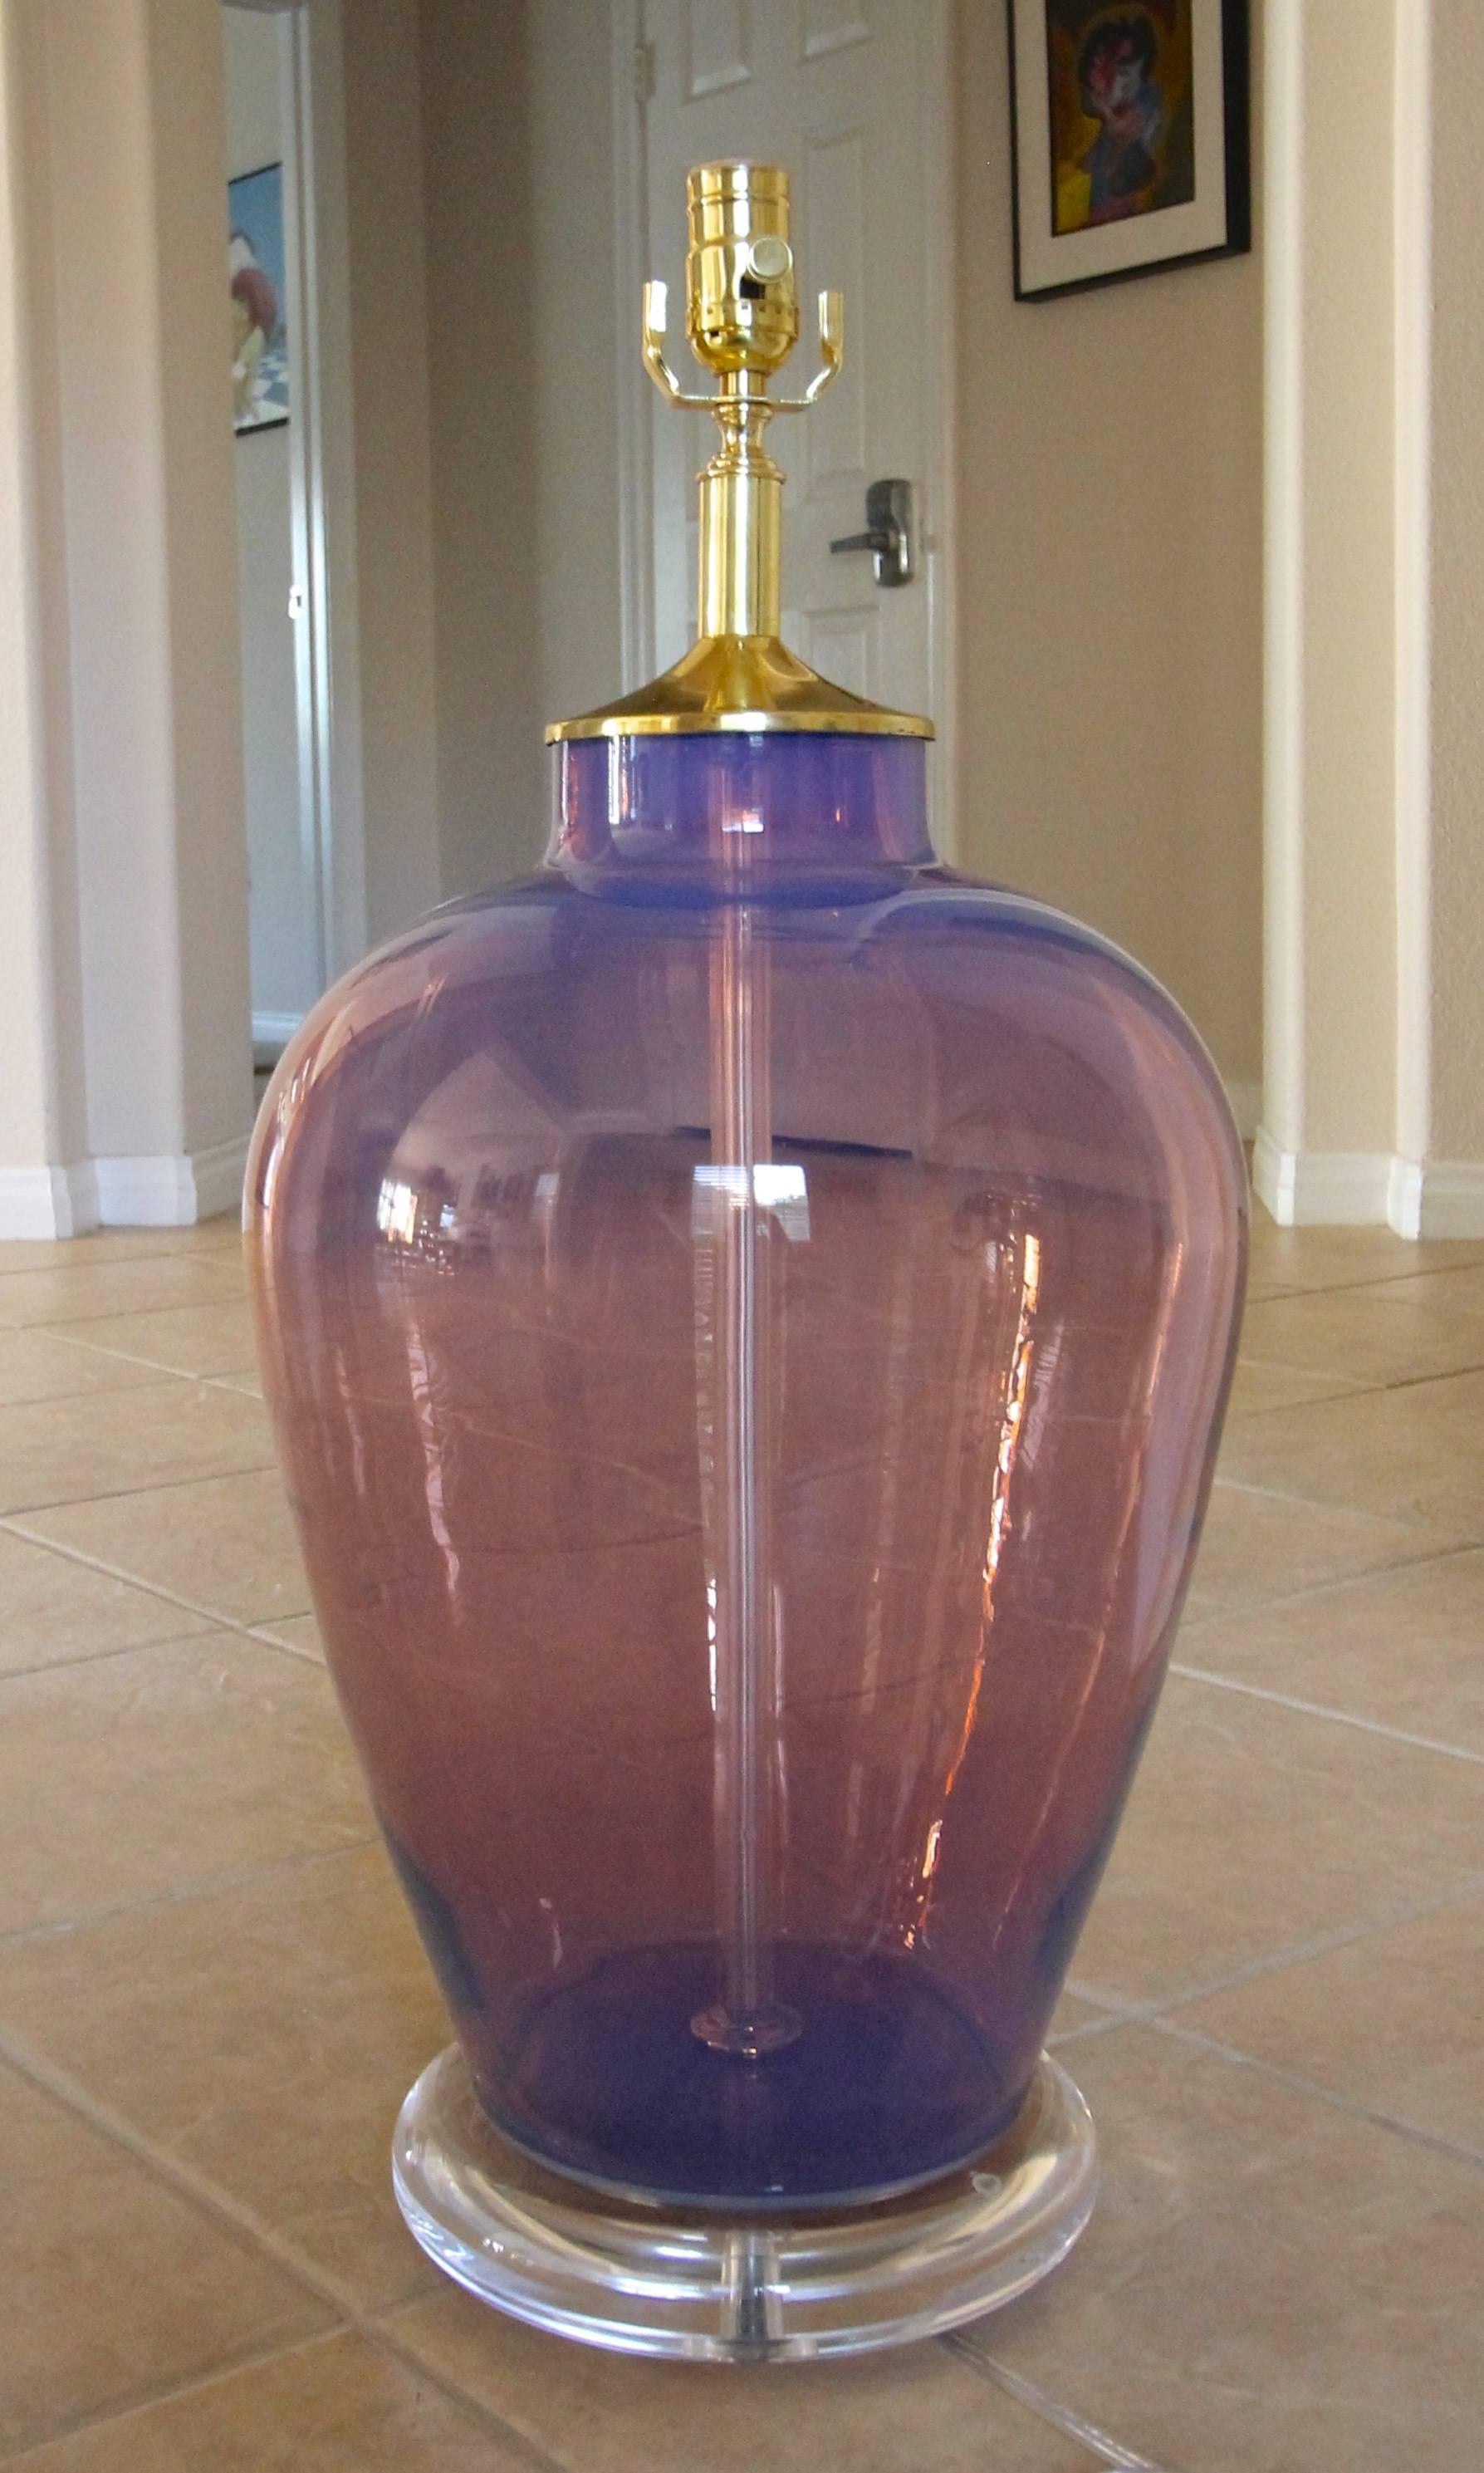 Larger bulbous shaped Murano opalescent glass table lamp with brass fittings and on custom acrylic base. The opalescent glass has soft hues of purple and lavender. Newly wired with new-three way brass socket and cord. Shade not included and is shown